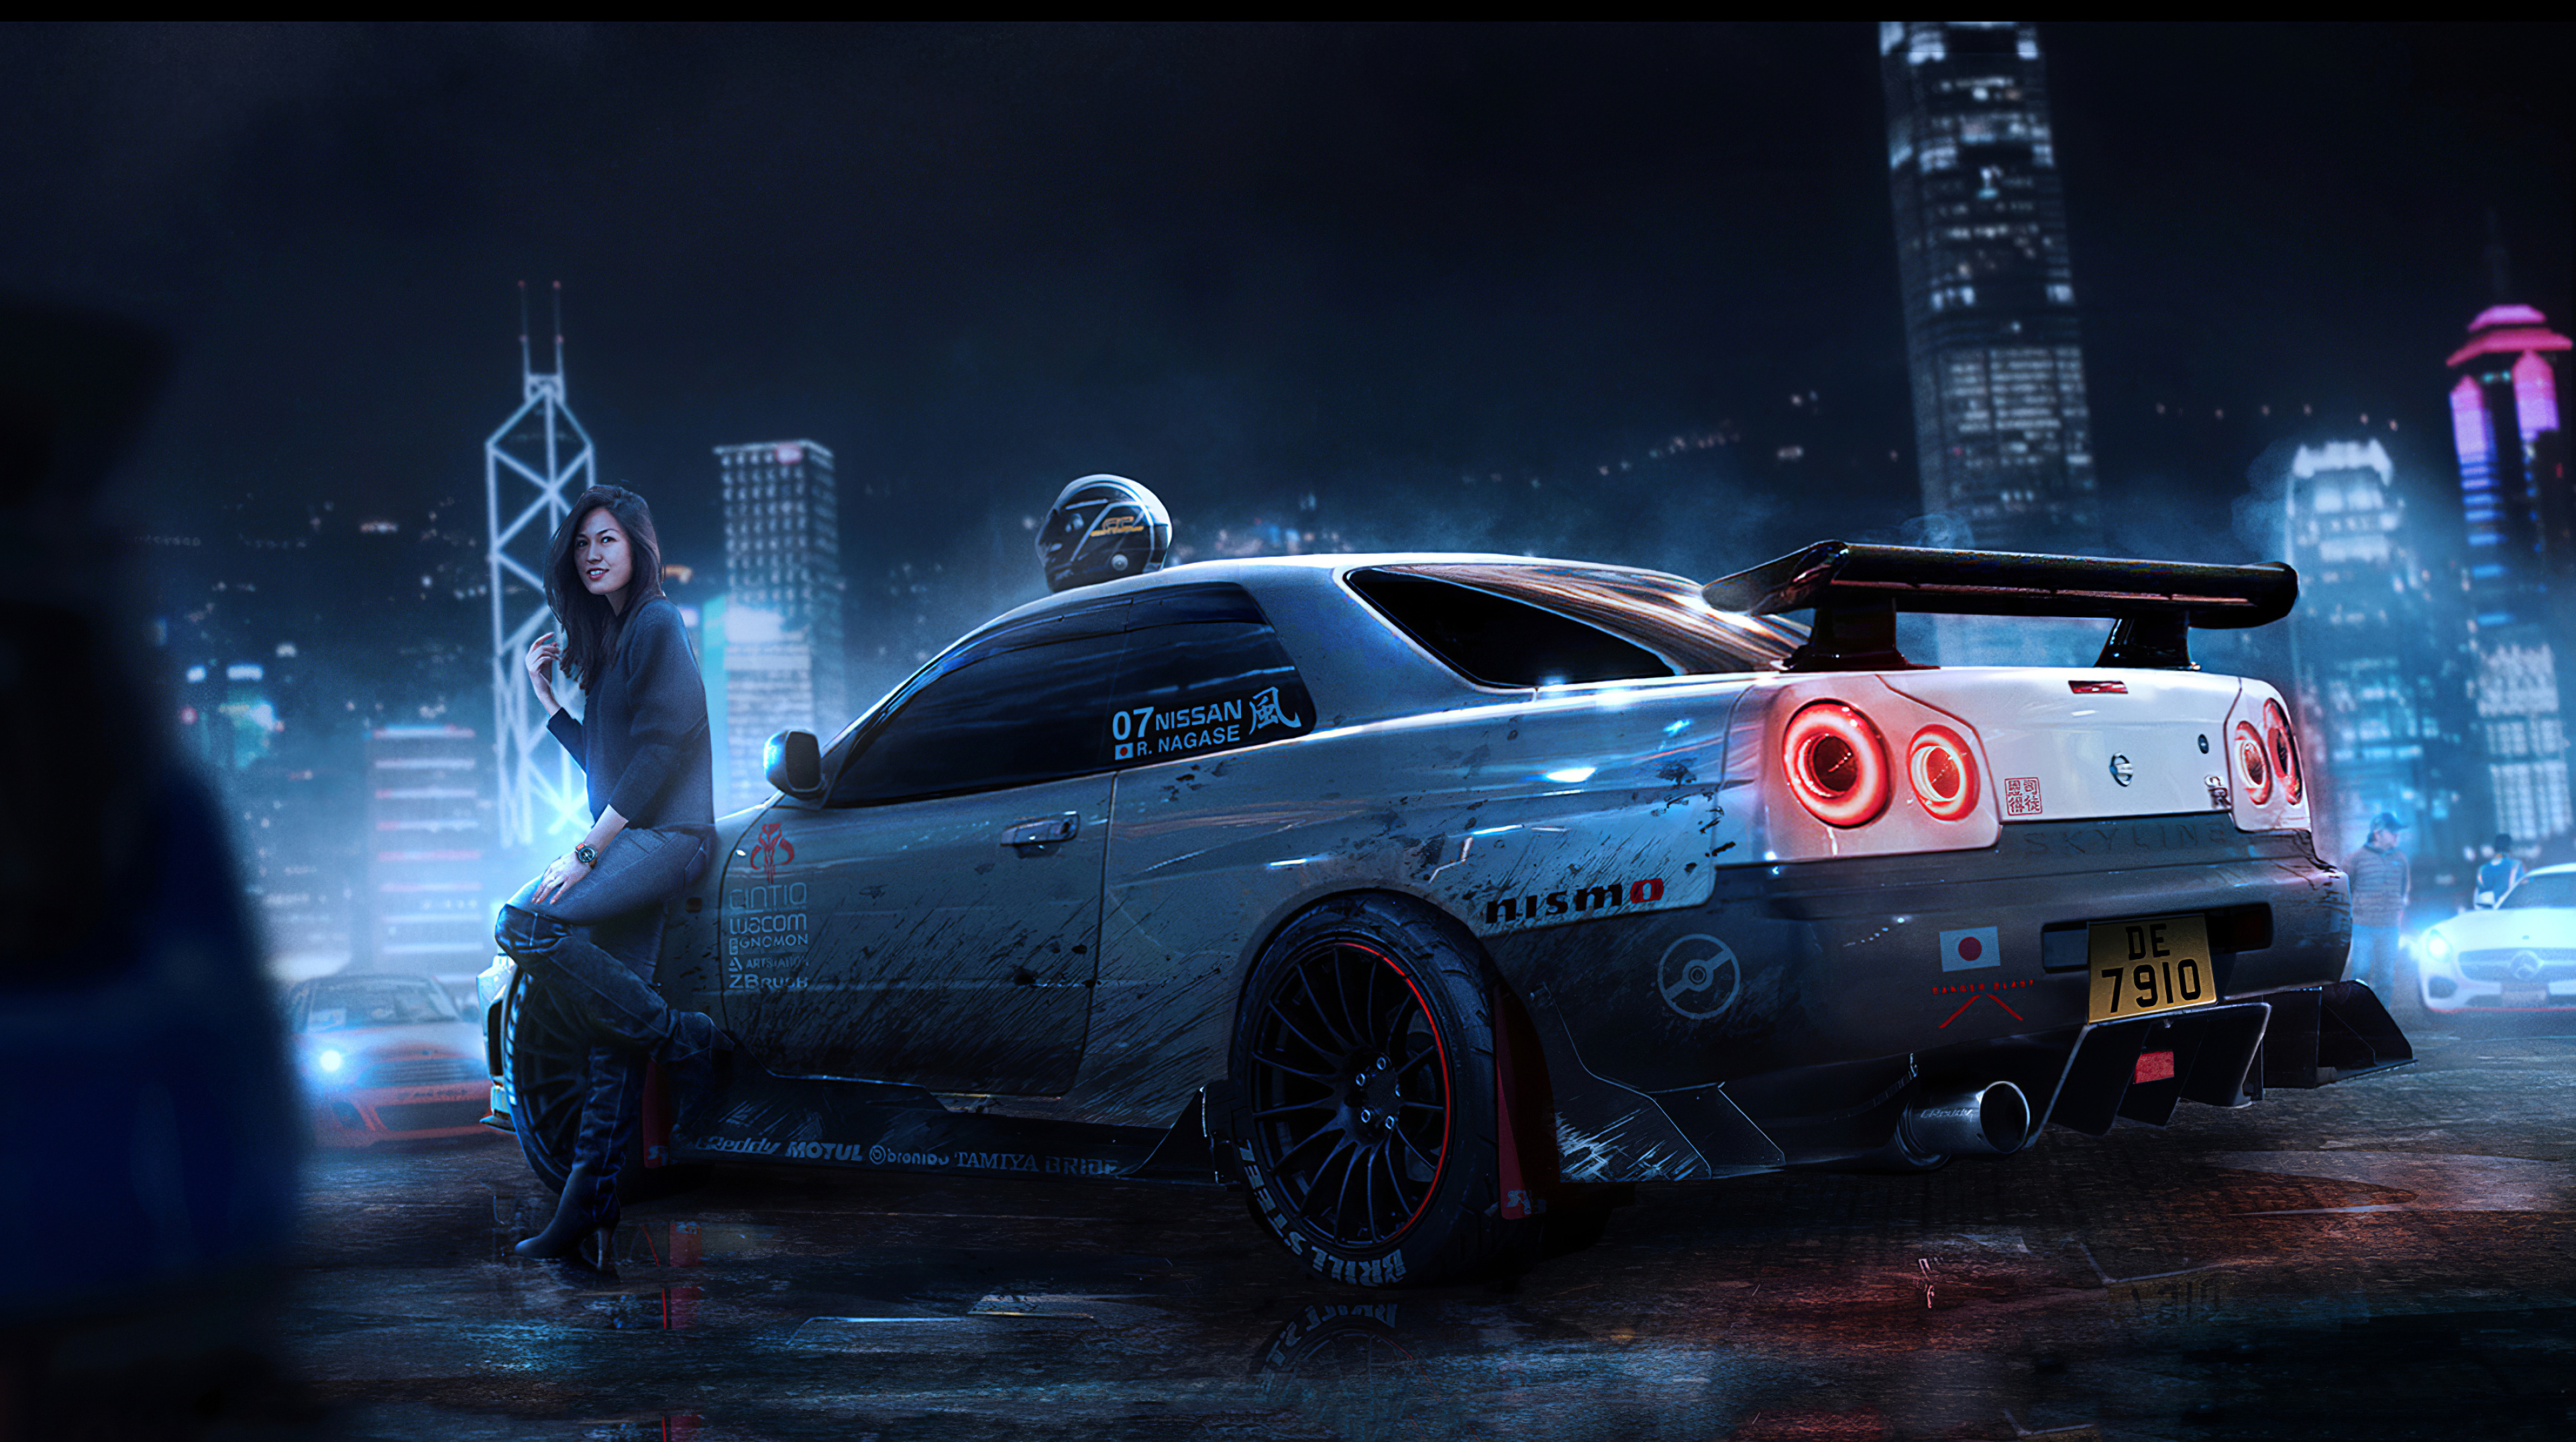 3840x2150 1920x1080 Nissan Skyline Gtr Laptop Full HD 1080P HD 4k Wallpapers, Images, Backgrounds, Photos and Pictures